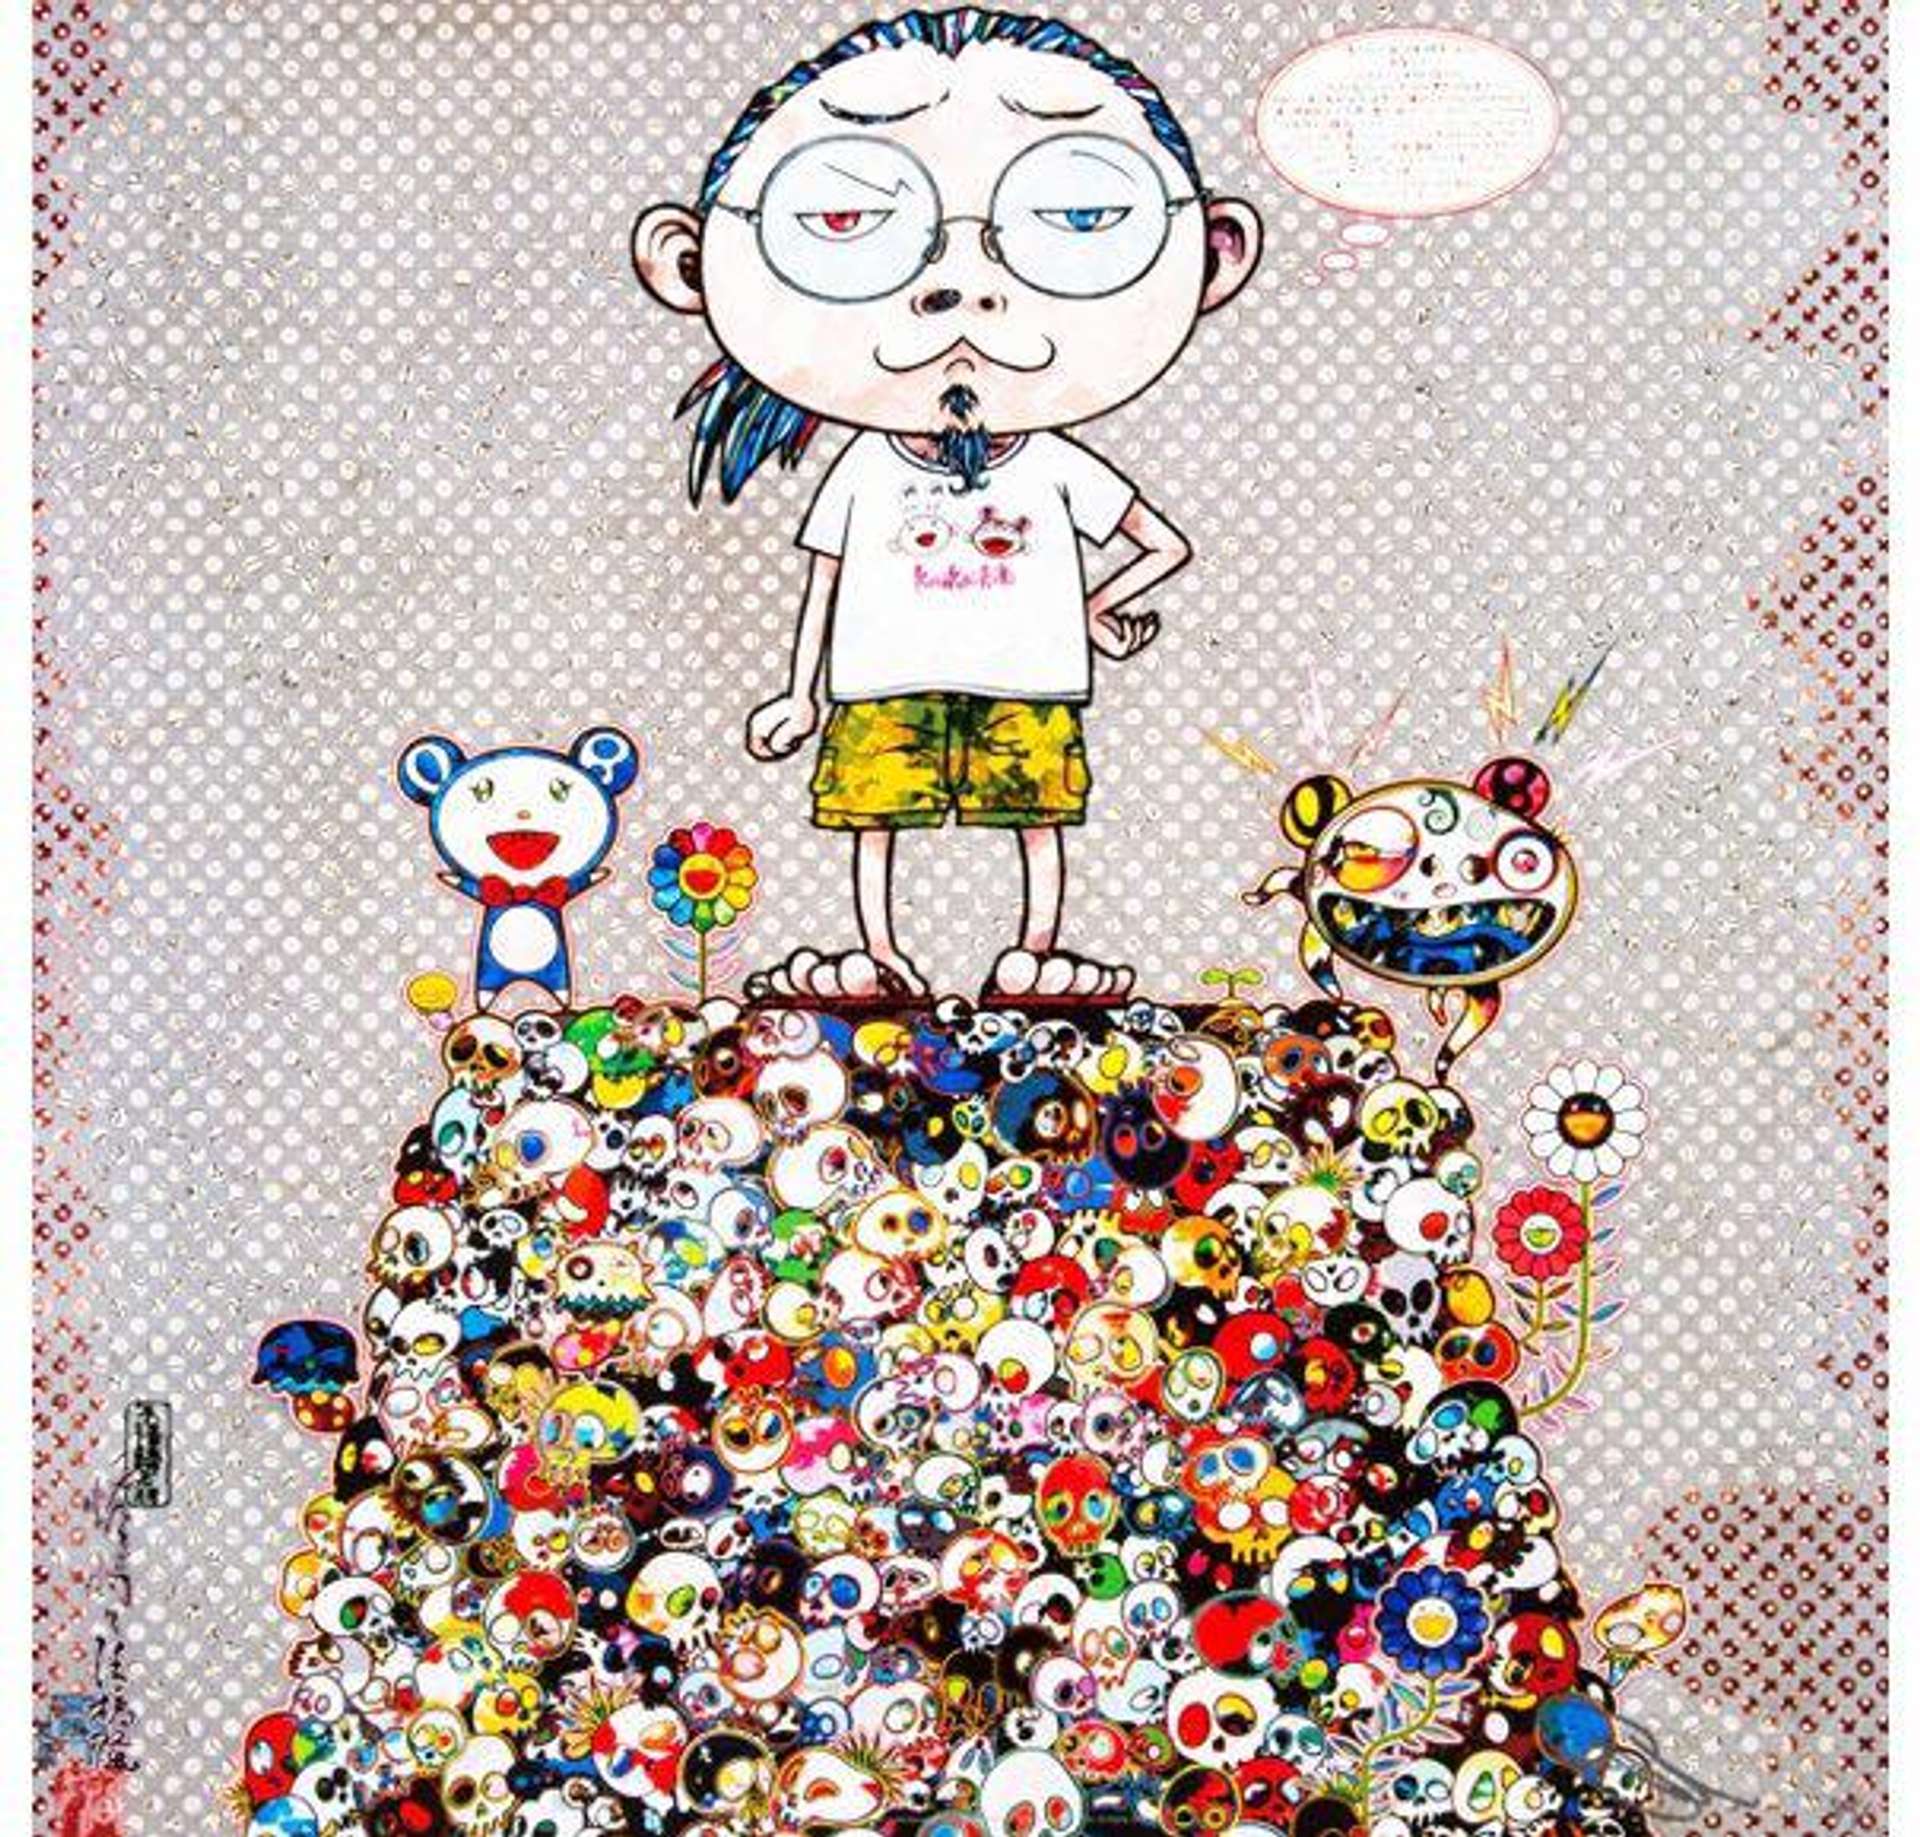 Takashi Murakami: With the Notion of Death the Flowers Look Beautiful - Signed Print